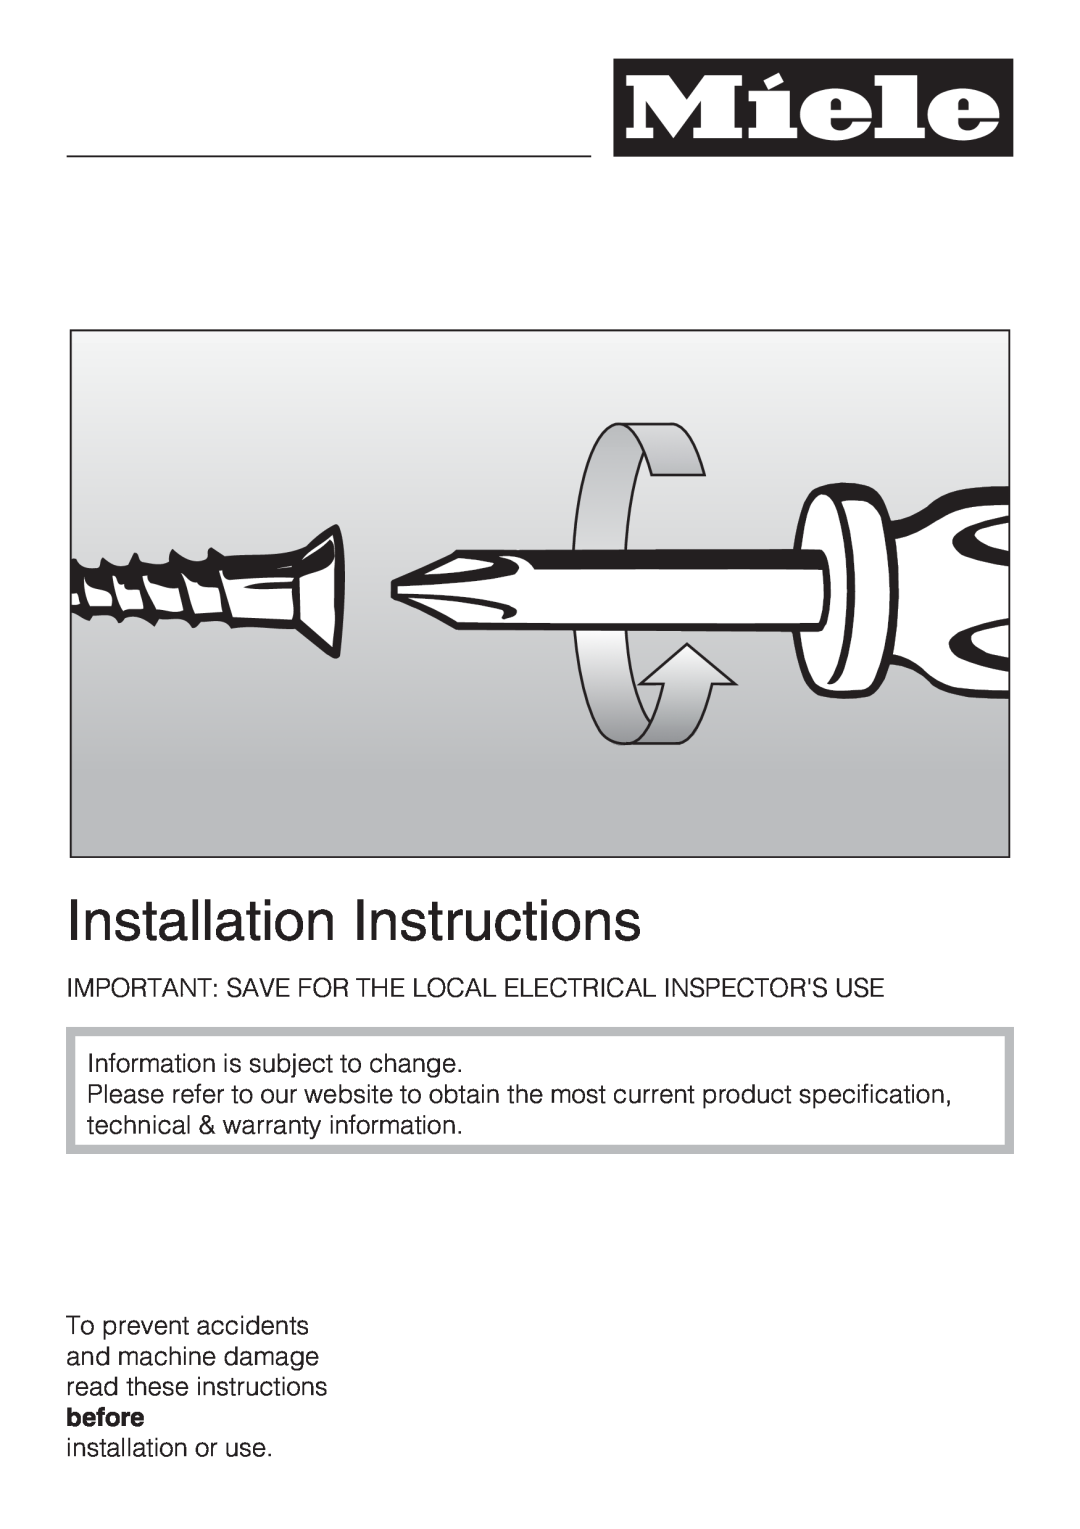 Miele ESW 408X-14 Installation Instructions, Important Save For The Local Electrical Inspectors Use, installation or use 